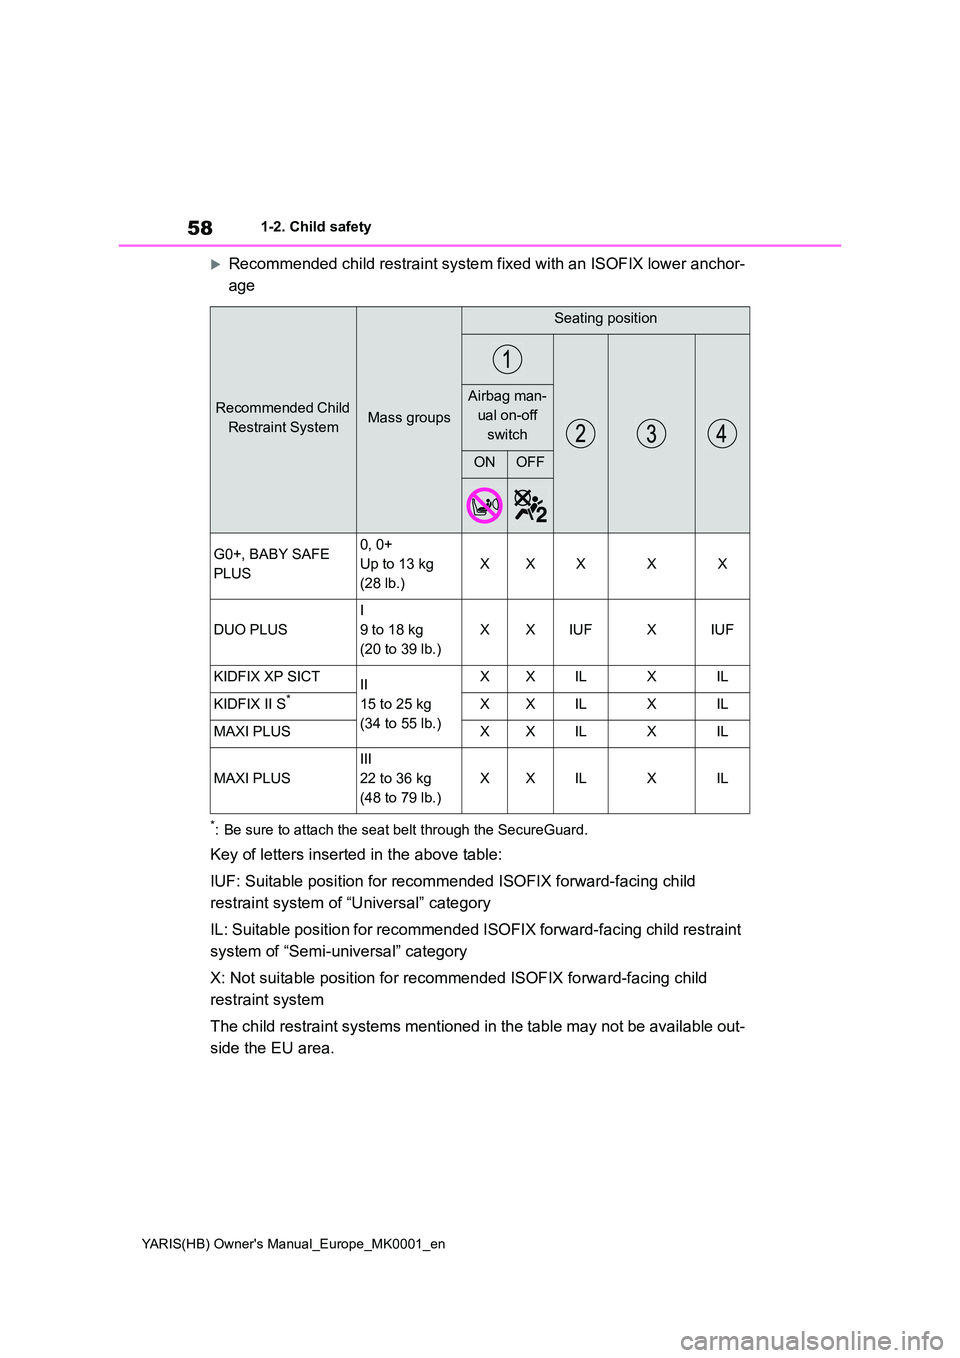 TOYOTA YARIS 2021 Owners Manual 58
YARIS(HB) Owners Manual_Europe_MK0001_en
1-2. Child safety
Recommended child restraint system fixed with an ISOFIX lower anchor- 
age
*: Be sure to attach the seat belt through the SecureGuard.